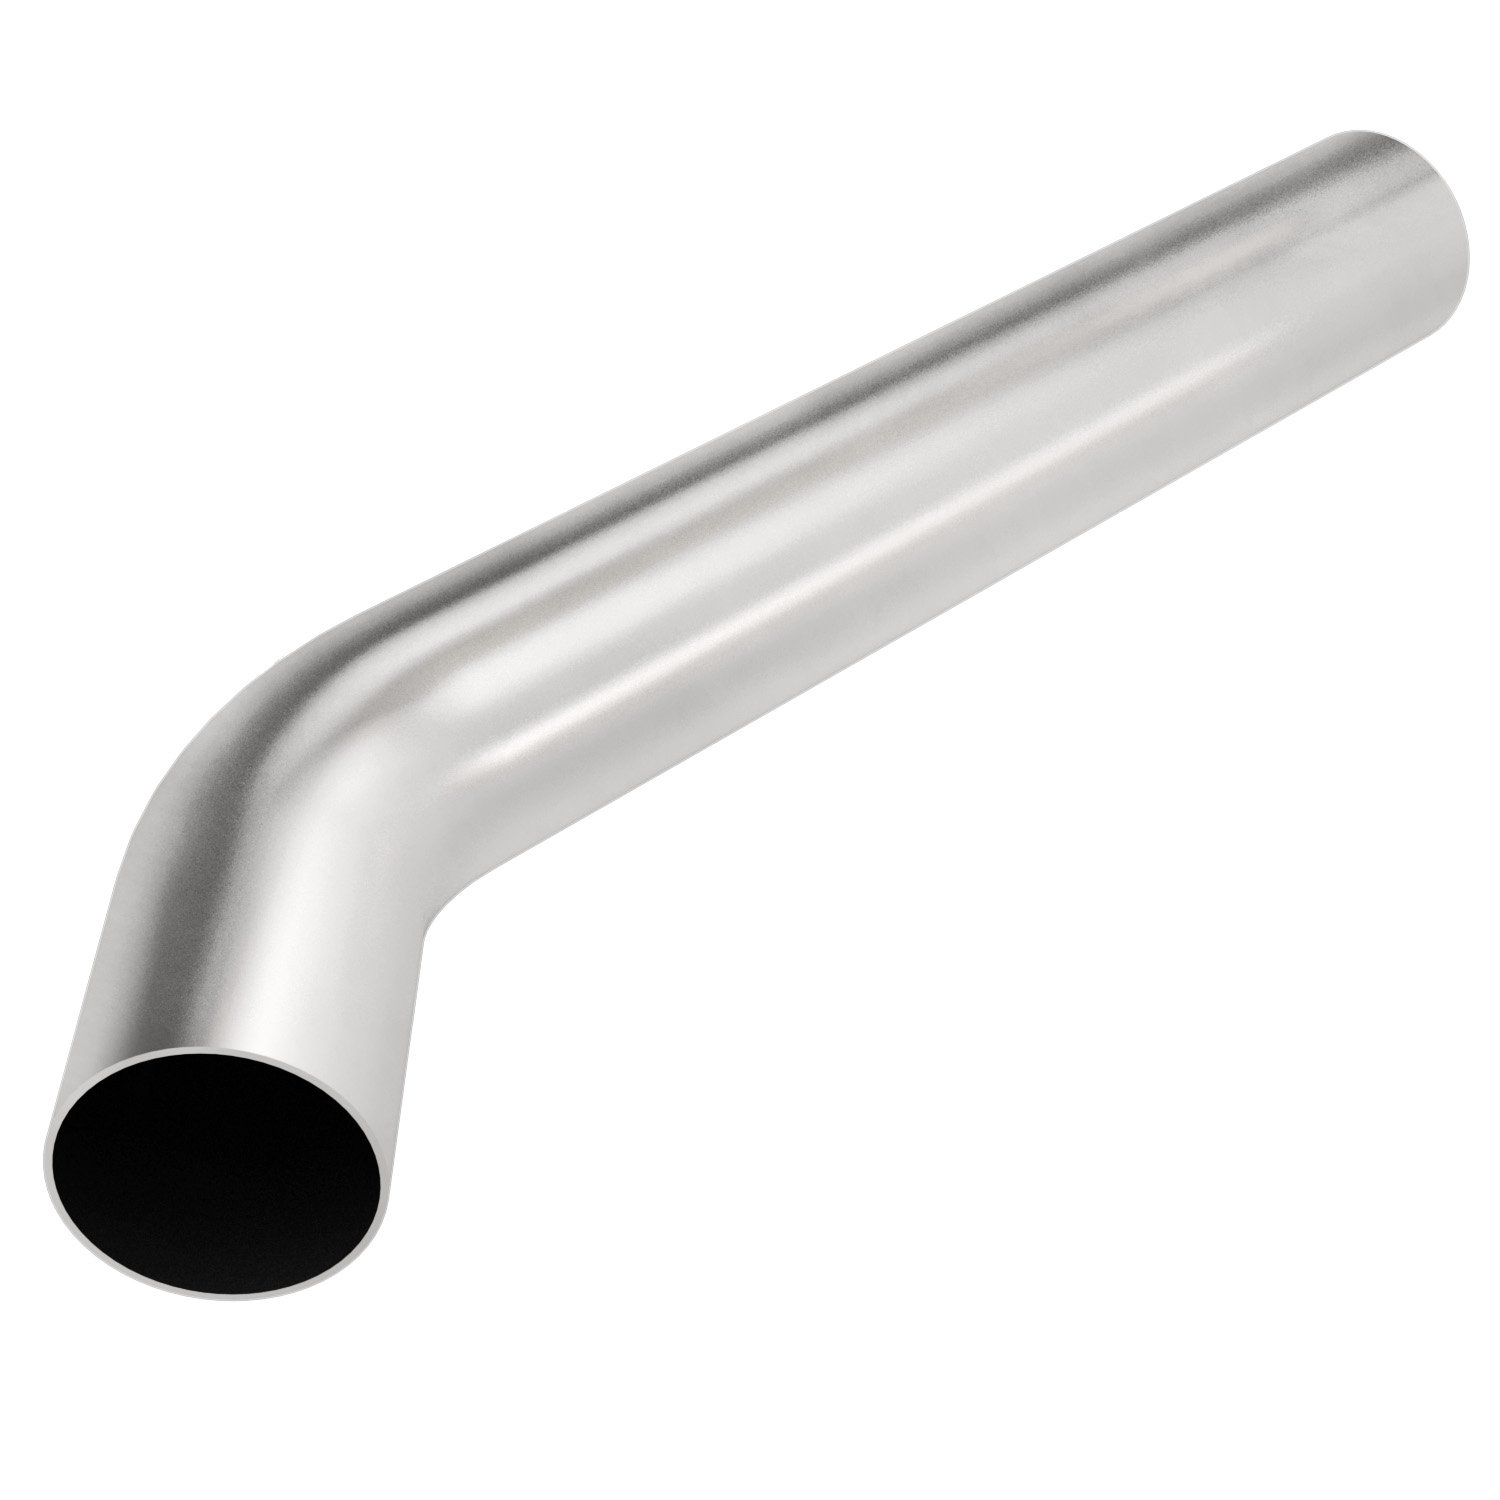 Stainless Steel 45° Transition Exhaust Pipes Outside Diameter: 2.5"